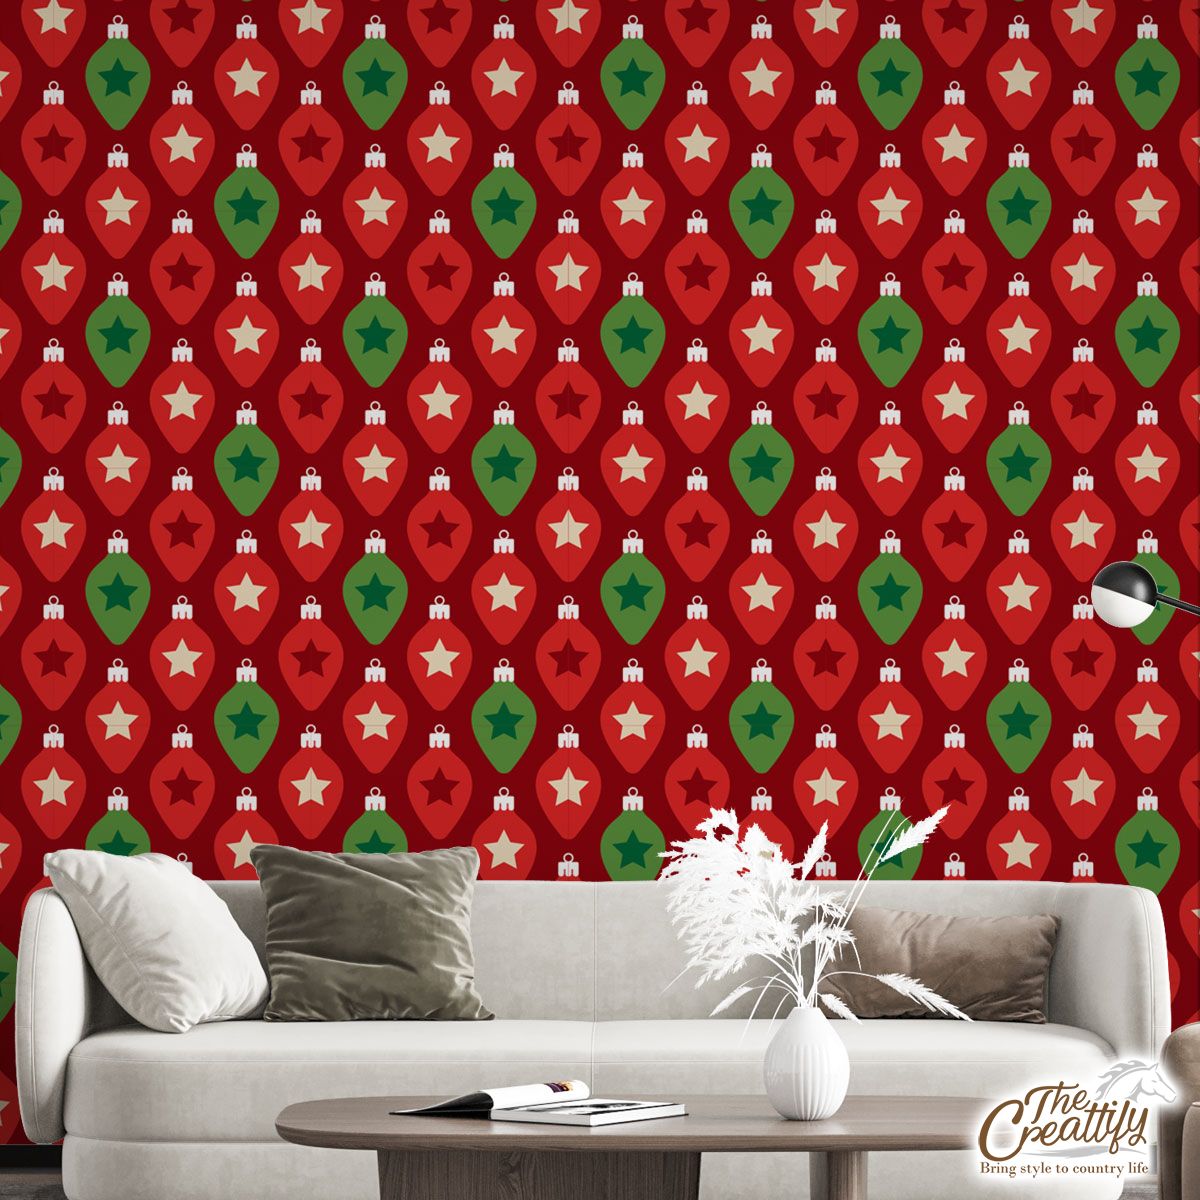 Red And Green Christmas Lights Seamless Pattern Wall Mural